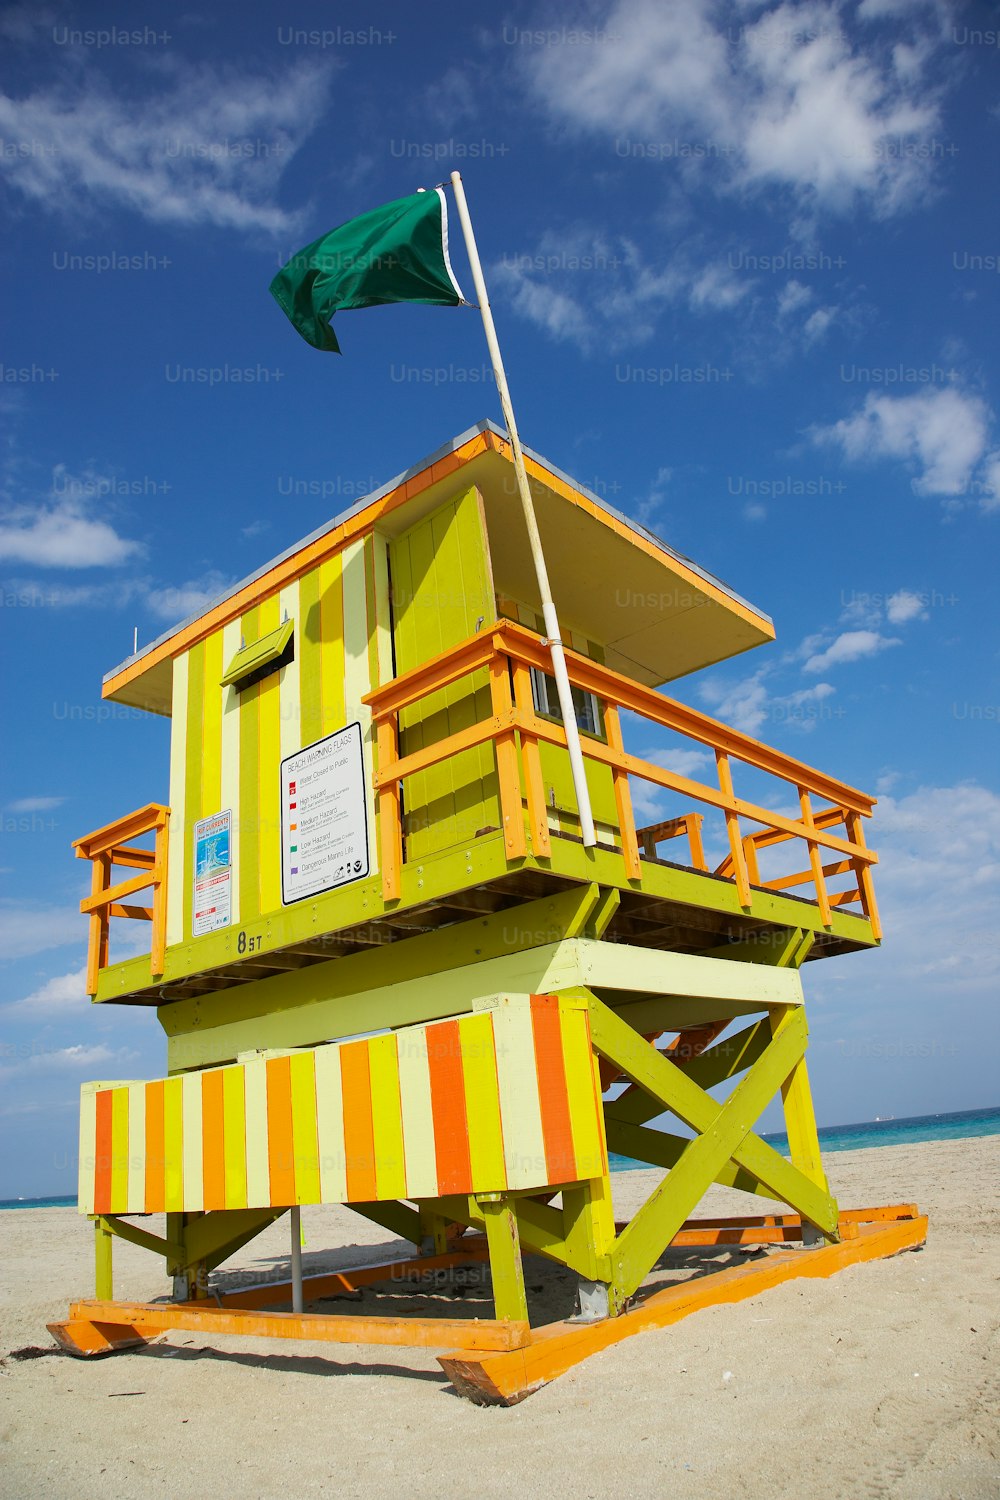 a lifeguard tower with a flag on top of it